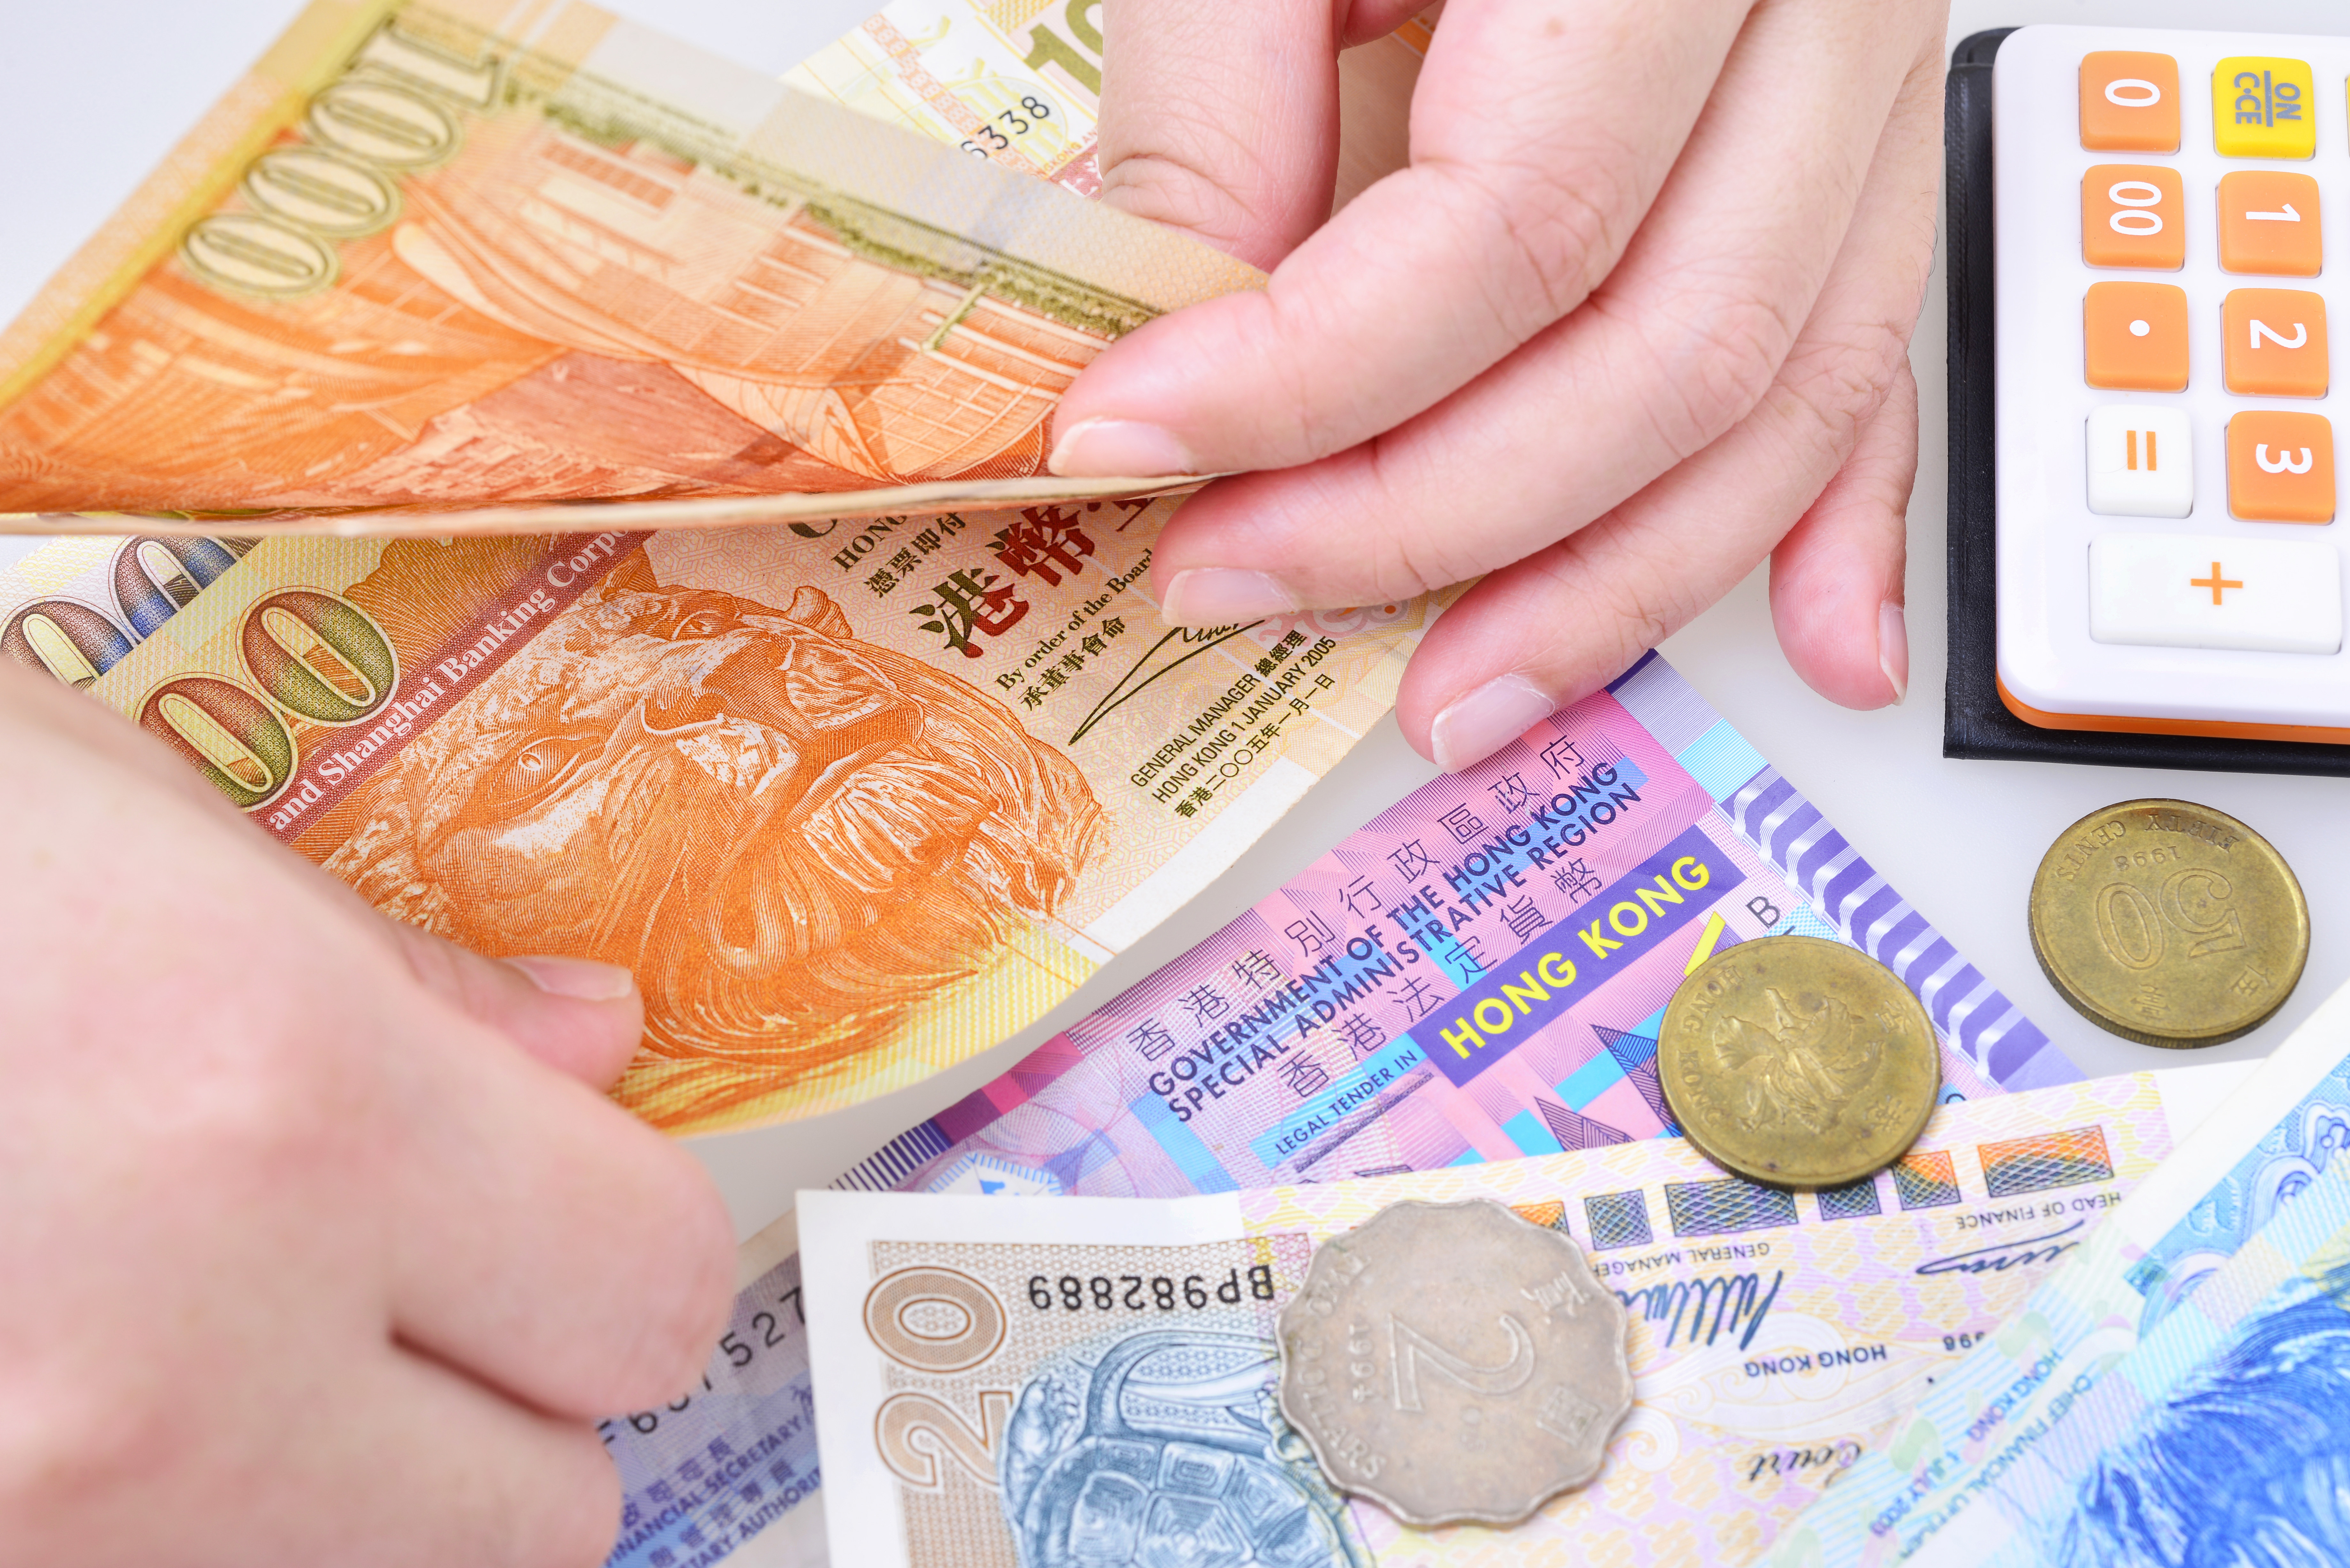 Hong Kong’s currency weakened to a one-year-low of about 7.77 per US dollar on March 8 as local stocks slumped from February’s peak. Photo: Shutterstock